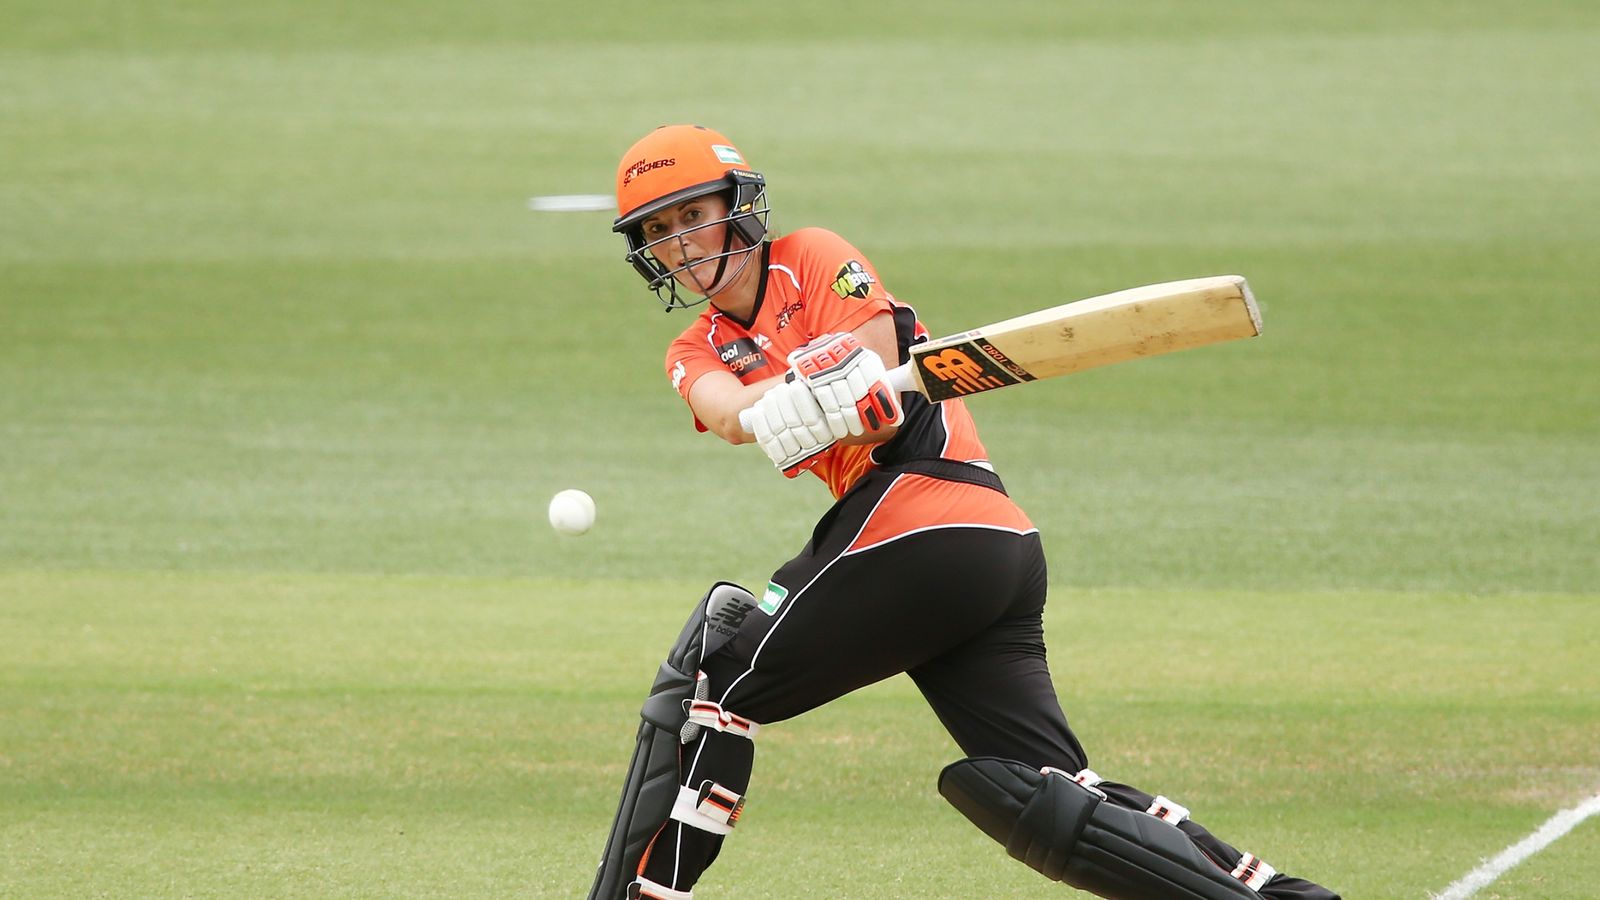 Former England captain Charlotte Edwards to play in Big Bash League for